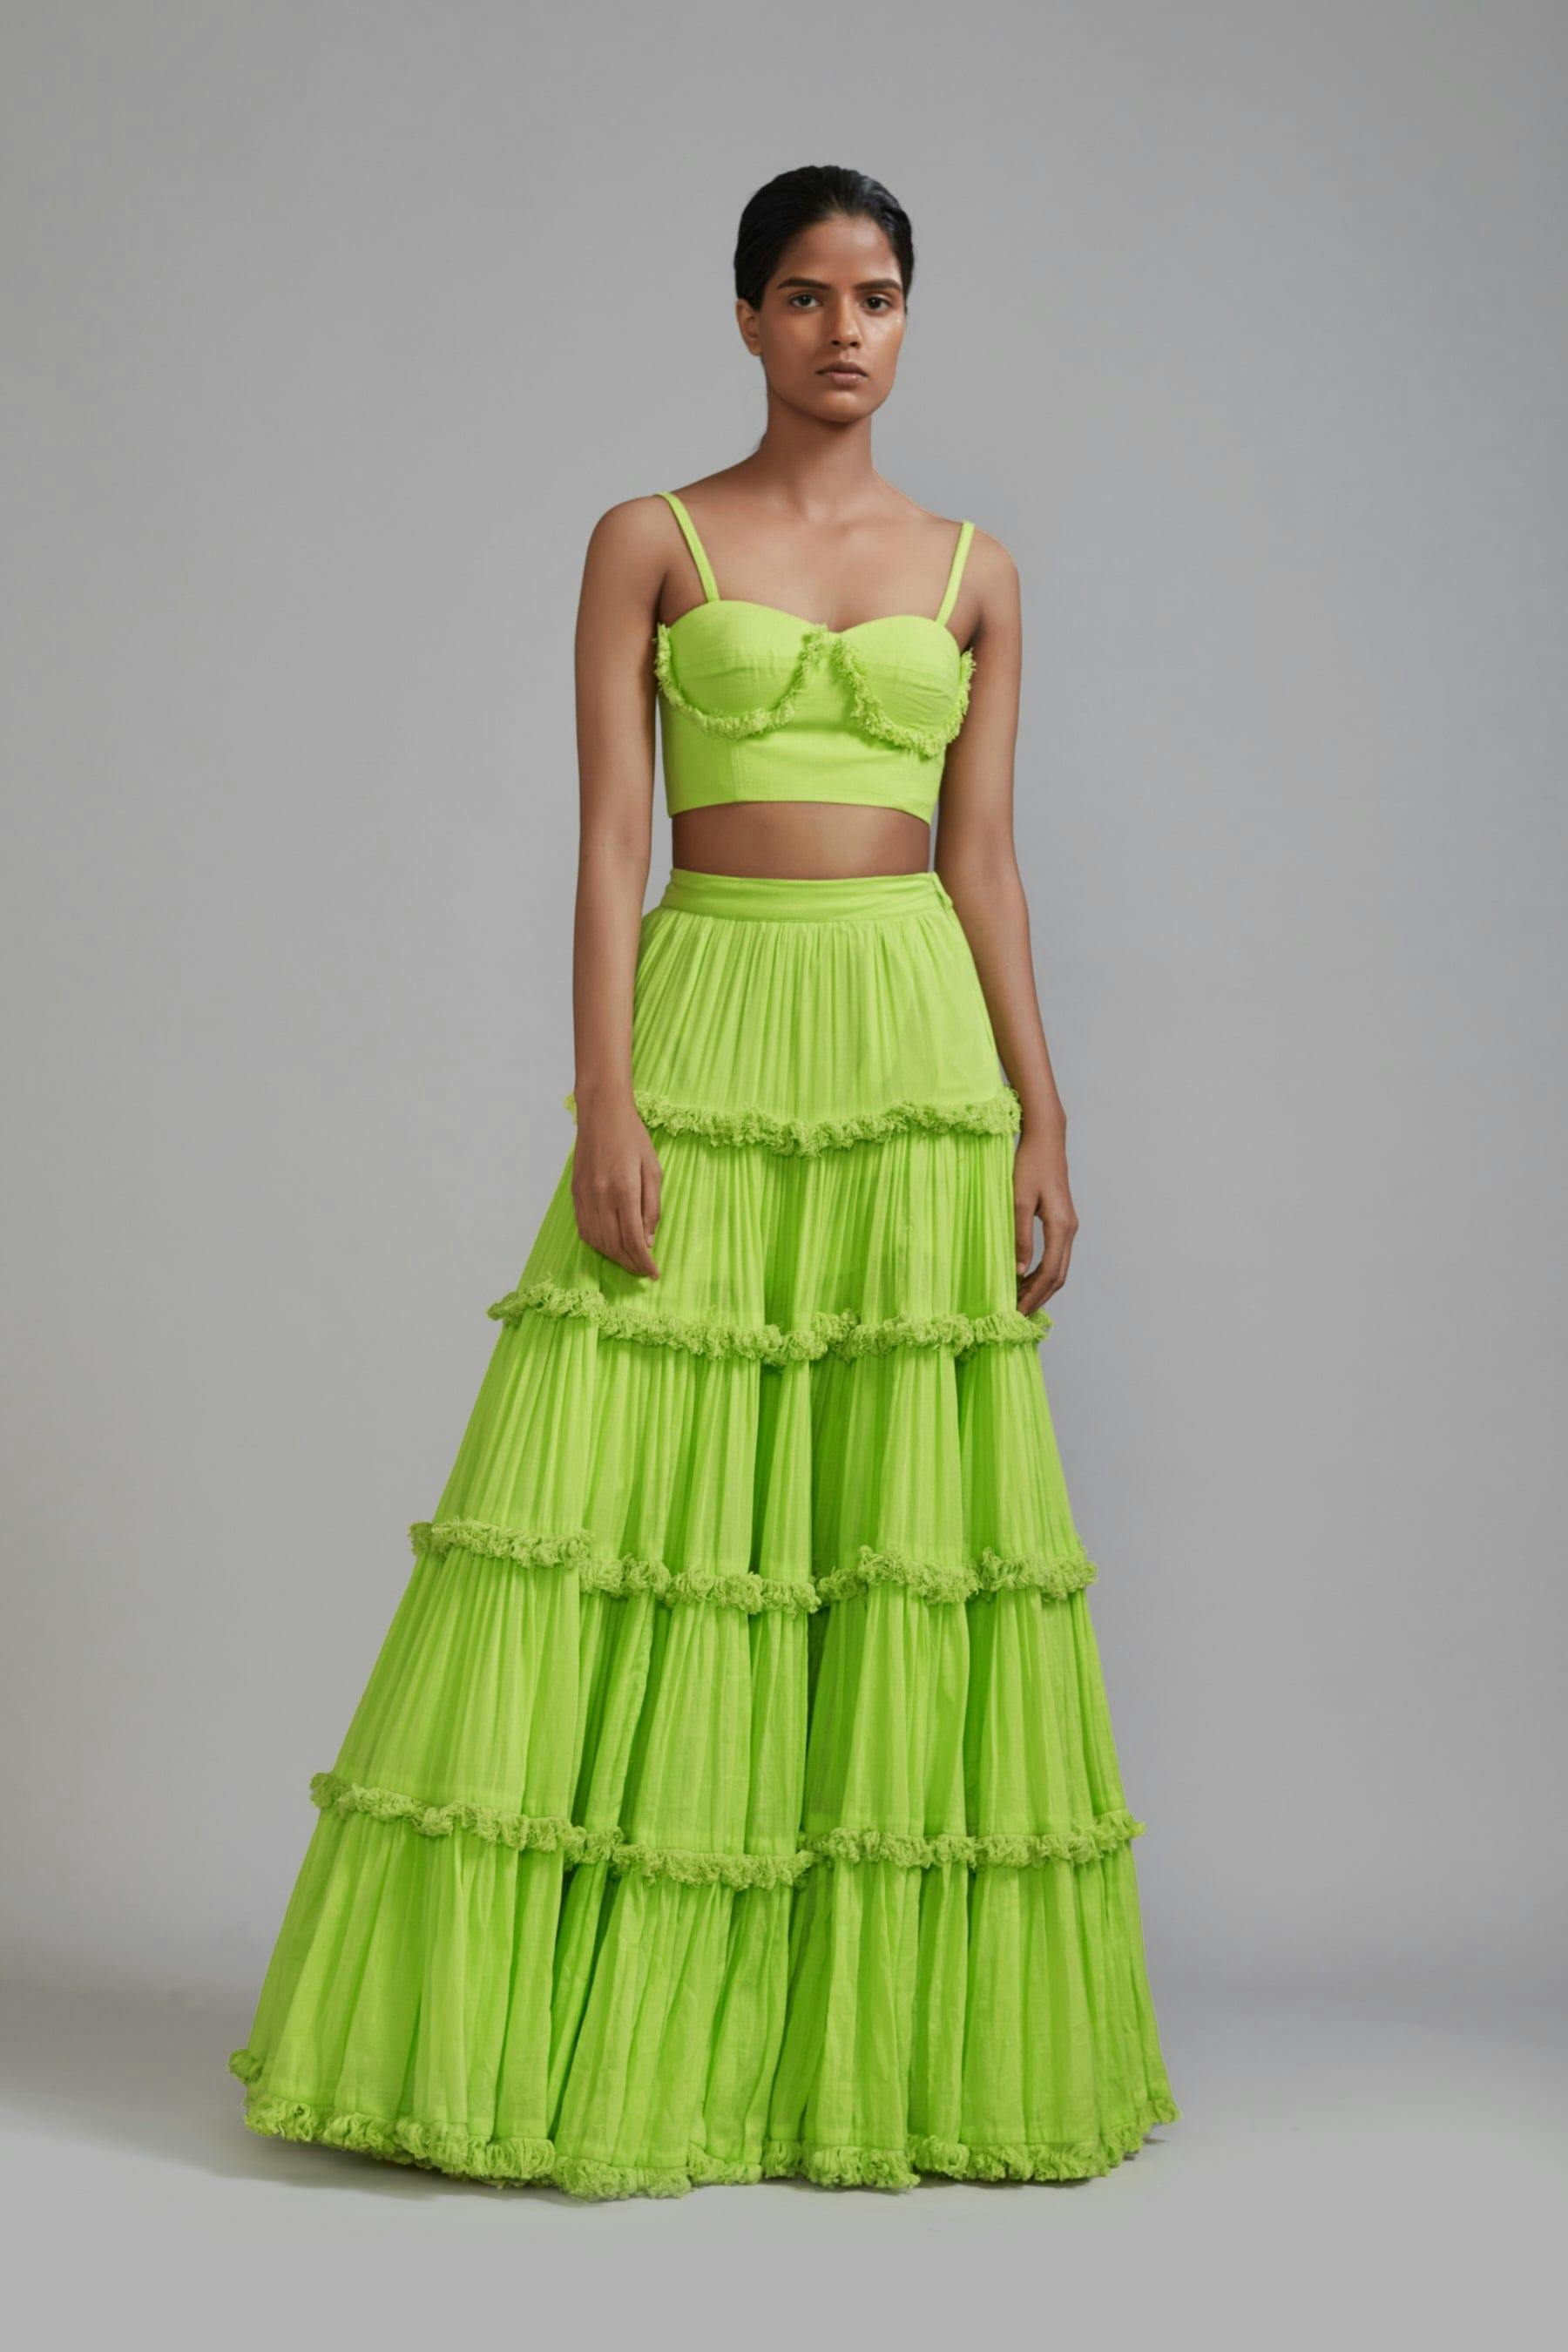 Neon Green Fringed Tiered Lehenga, a product by Style Mati